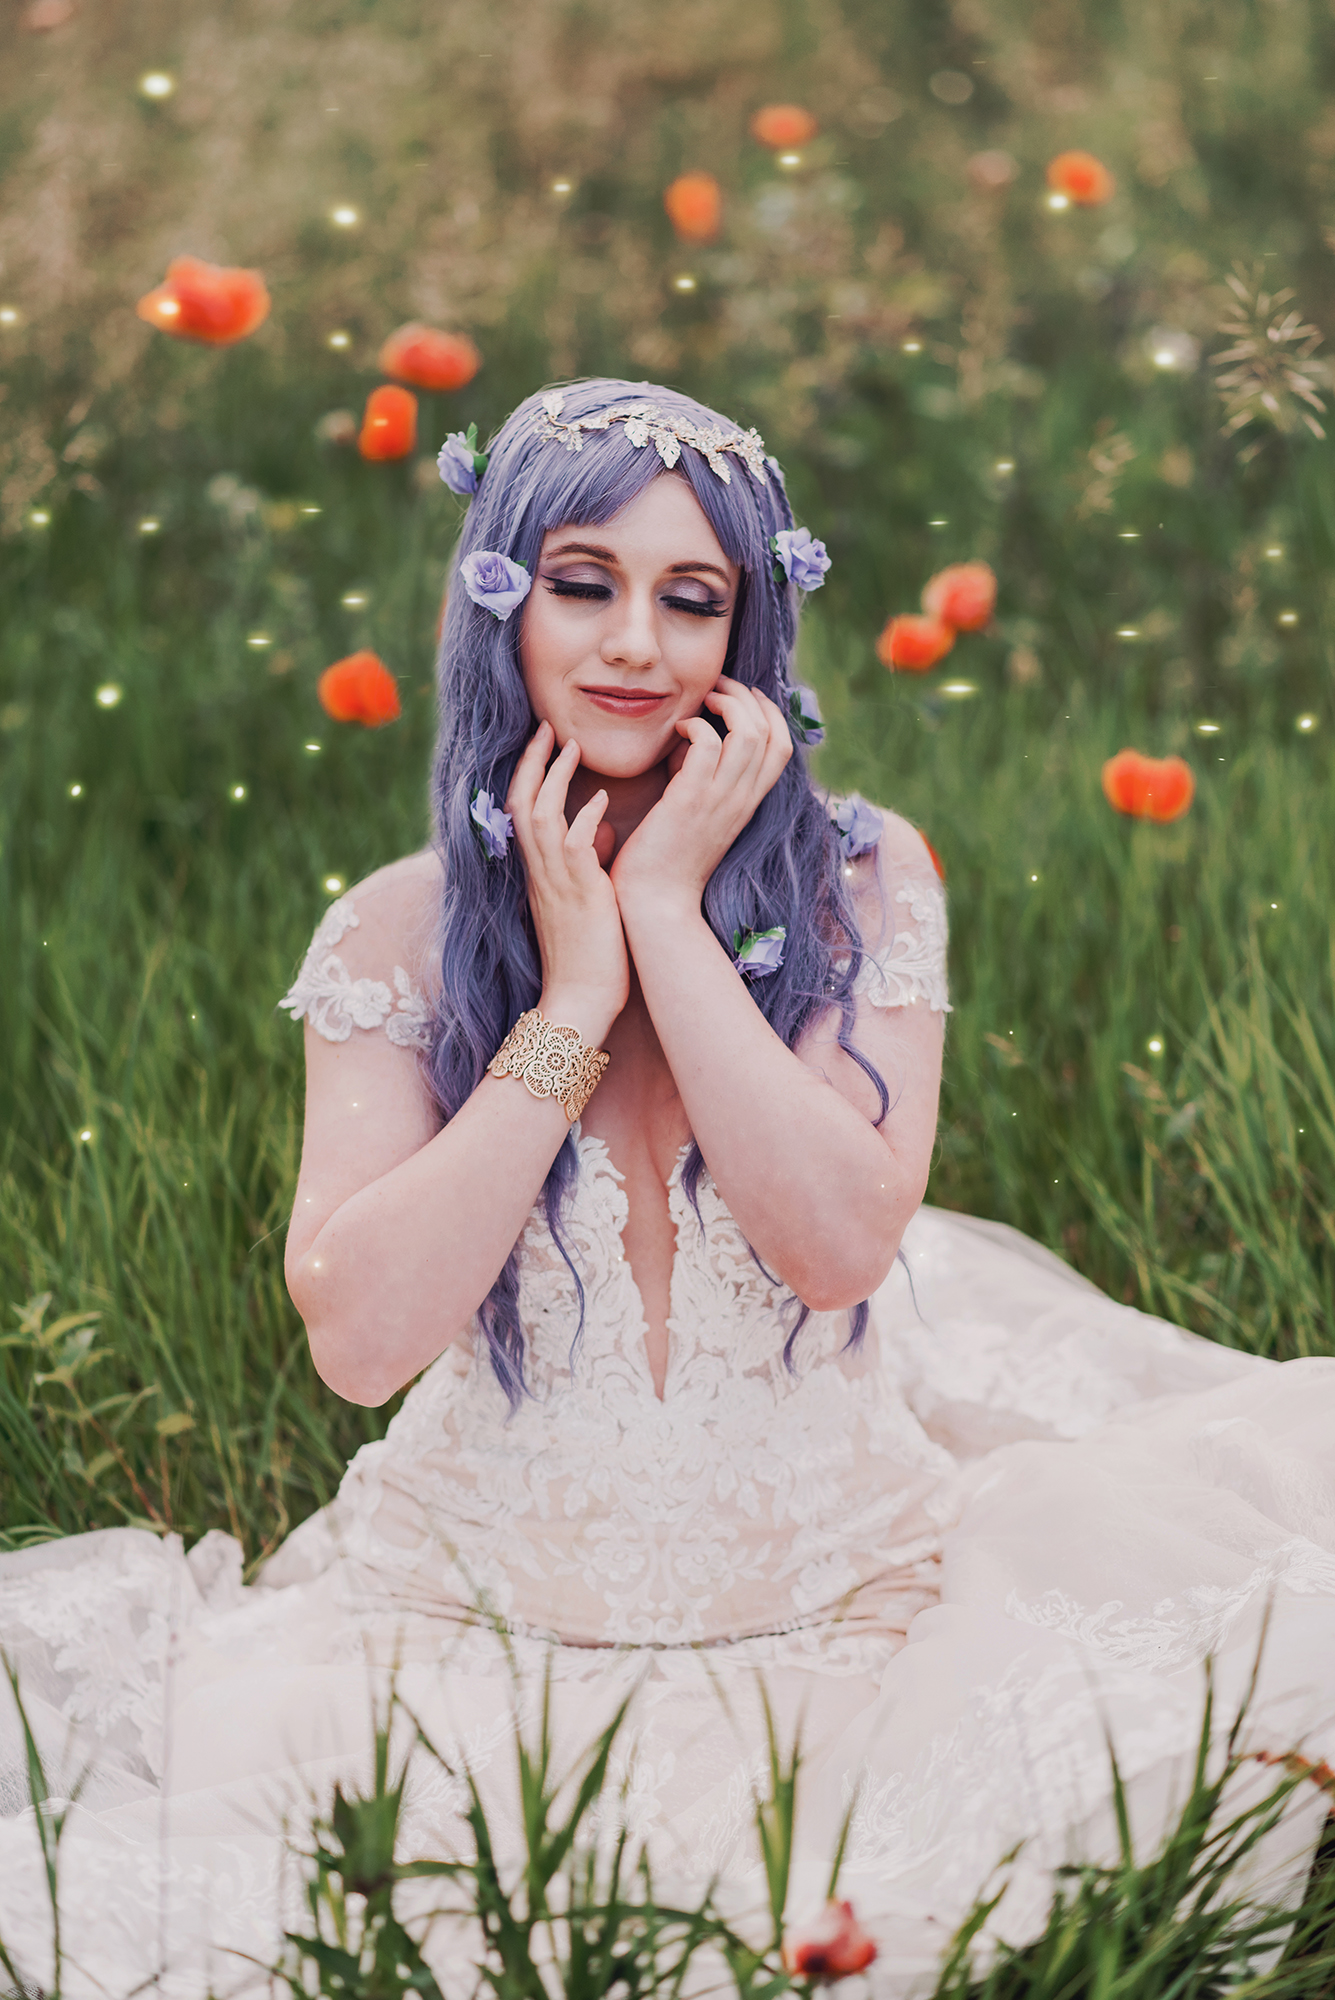 Kendra Colleen Photography takes fantasy image of a woman with purple hair sitting in a field of grass and wildflowers, she wears a white dress and a gold bracelet.